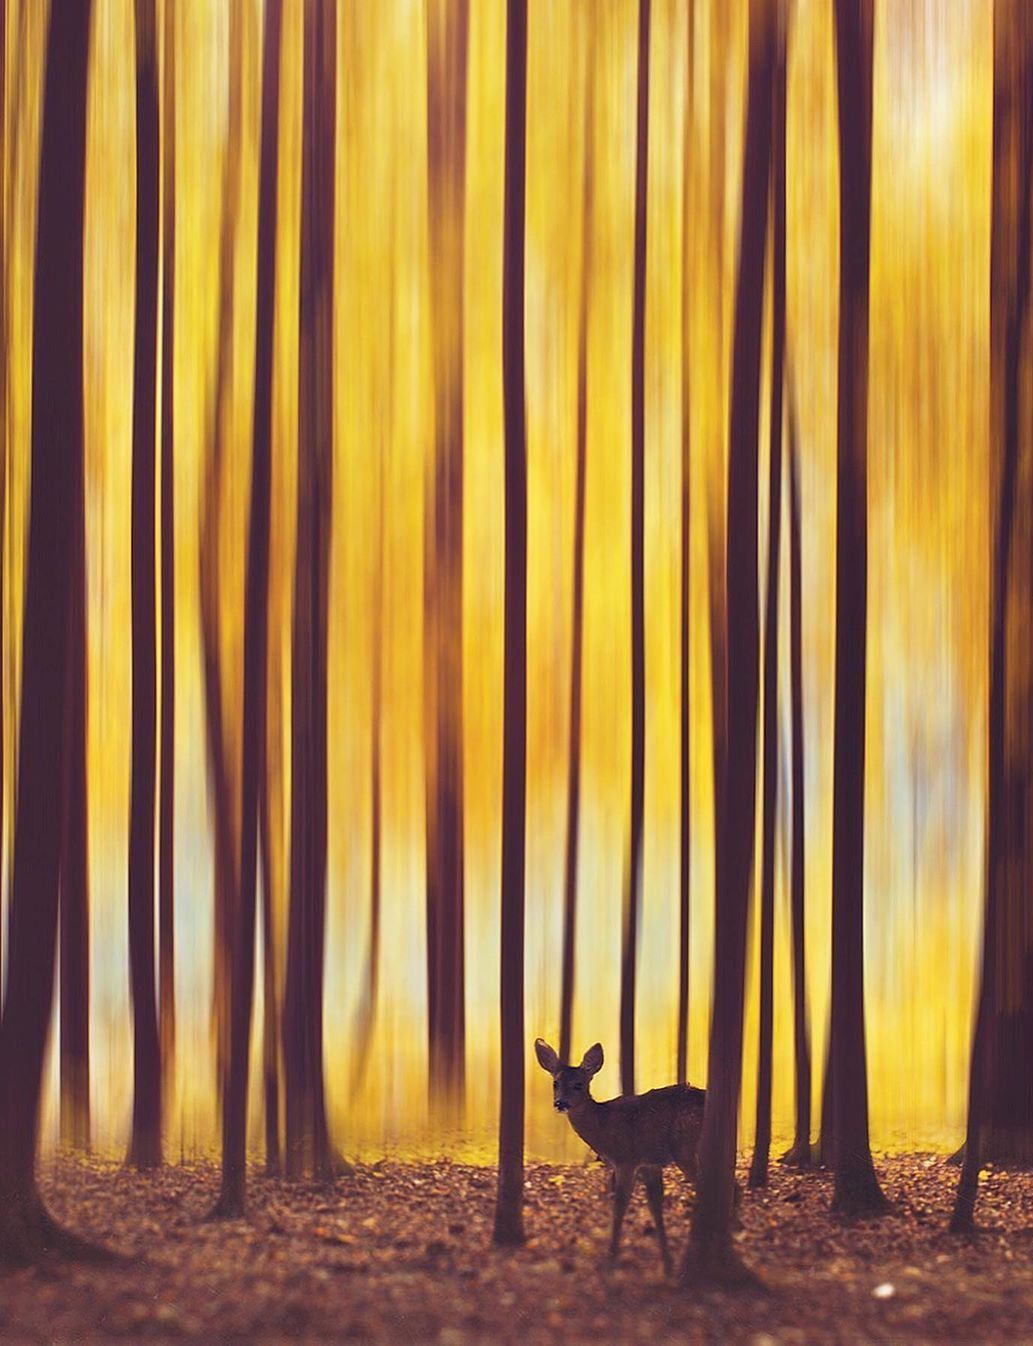 A deer is standing in the middle of some trees - Yellow iphone